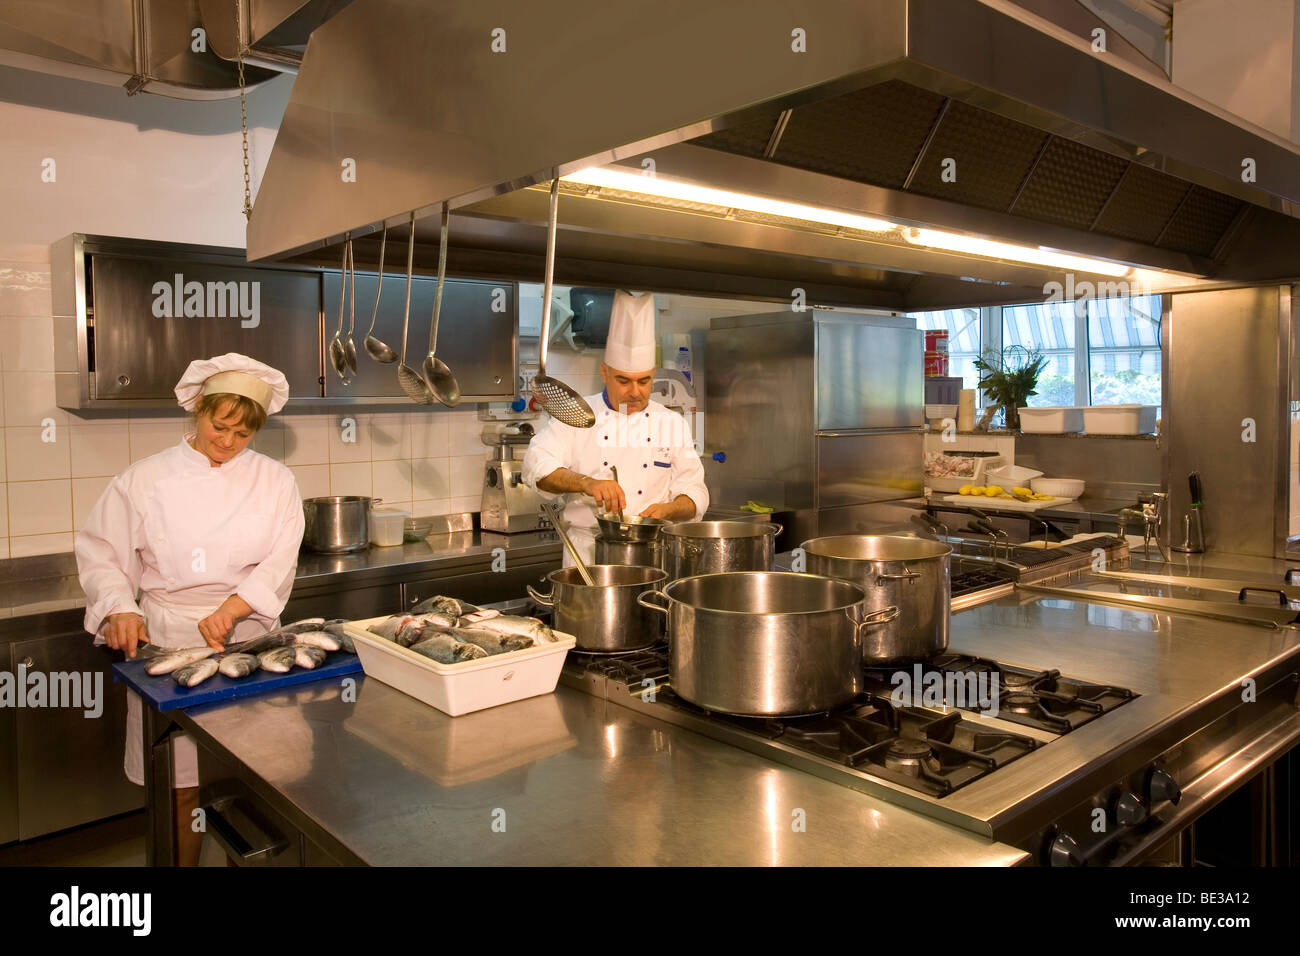 2 Chefs preparing a meal in the kitchen of the Hotel Imperial at the  seaside resort town of Marotta Di Fano, Marche, Italy Stock Photo - Alamy